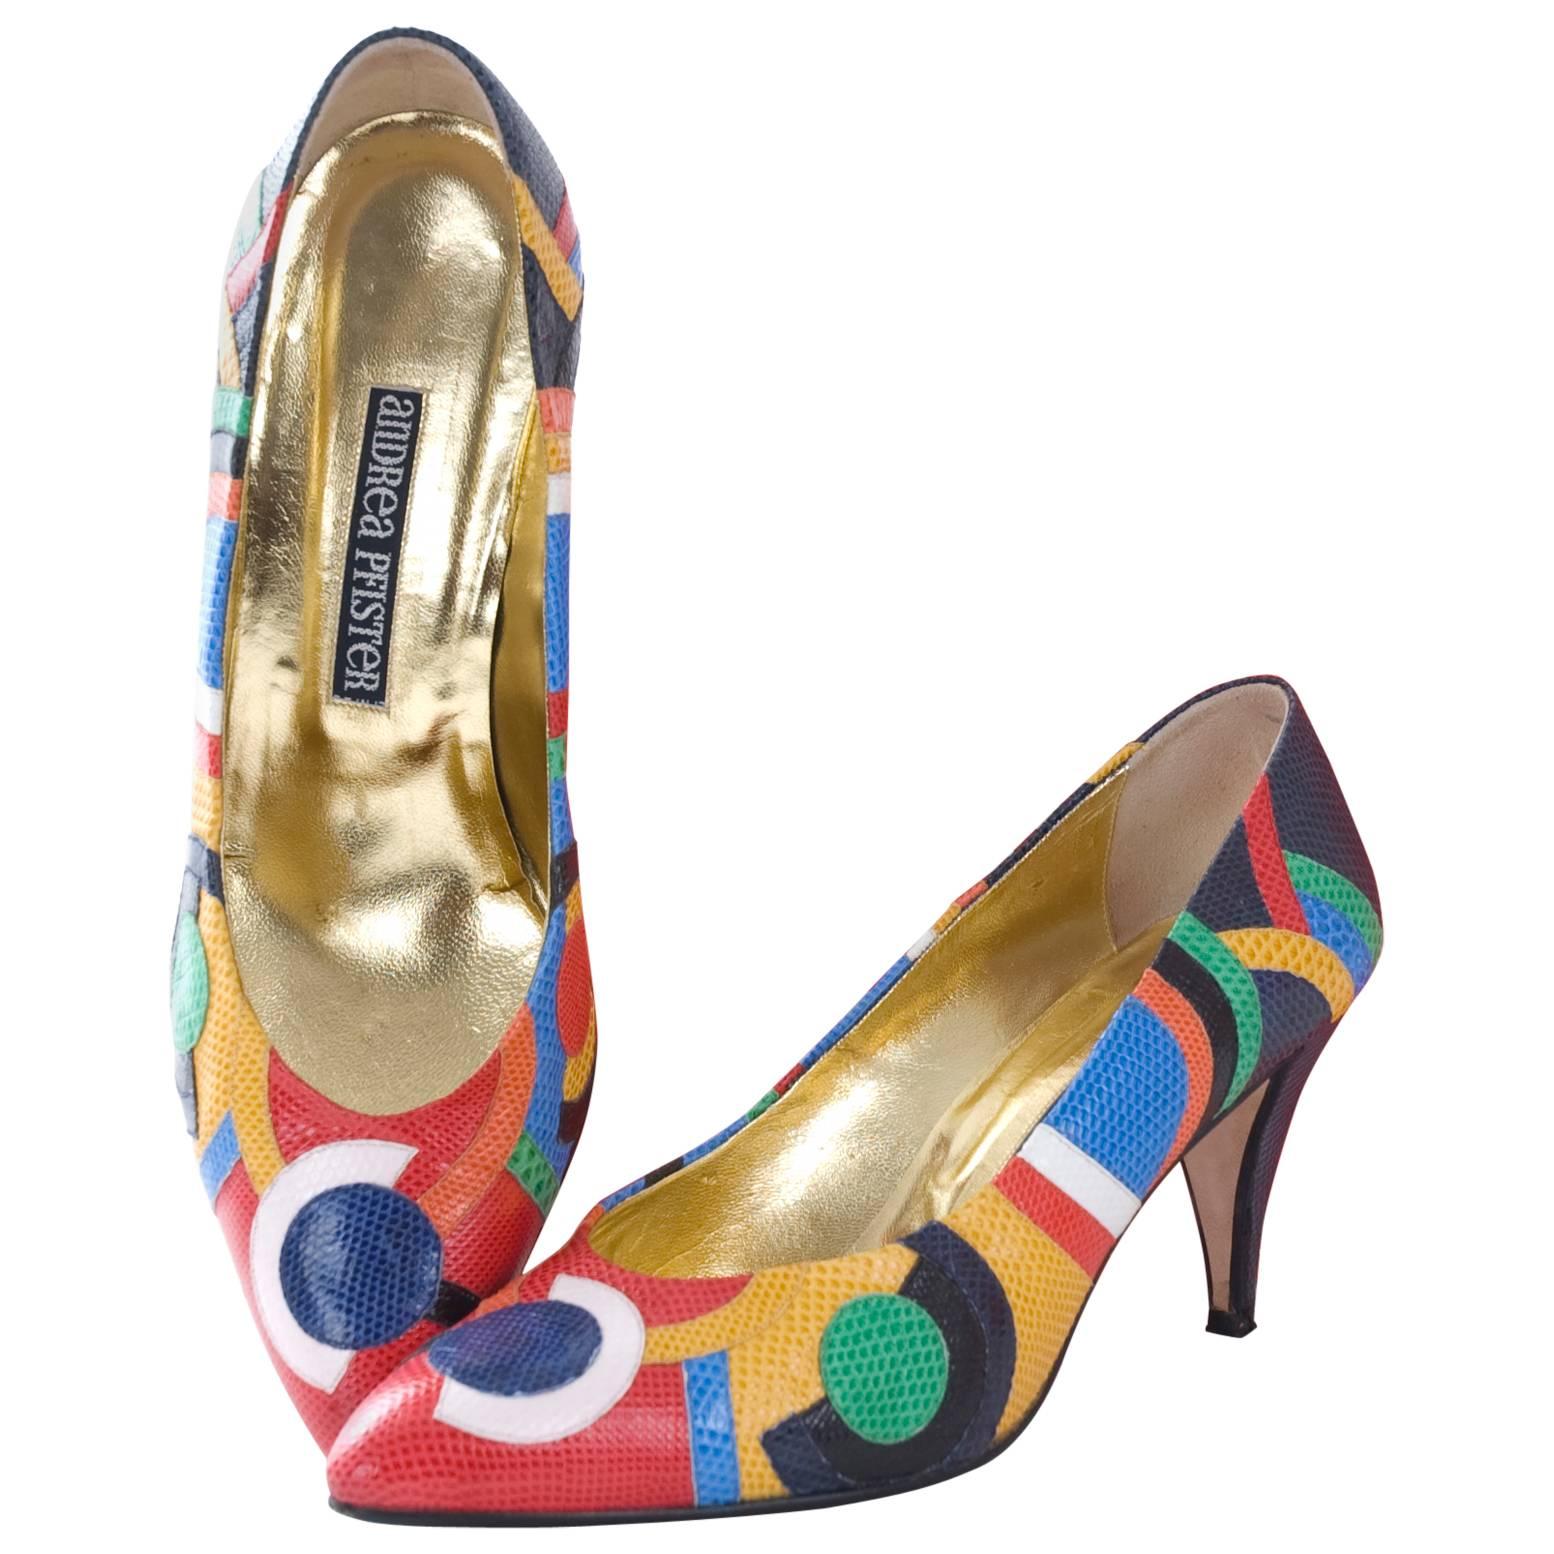 Vintage Andrea Pfister Shoes in Colorful Karung Snakeskin Pattern US 9 For Sale